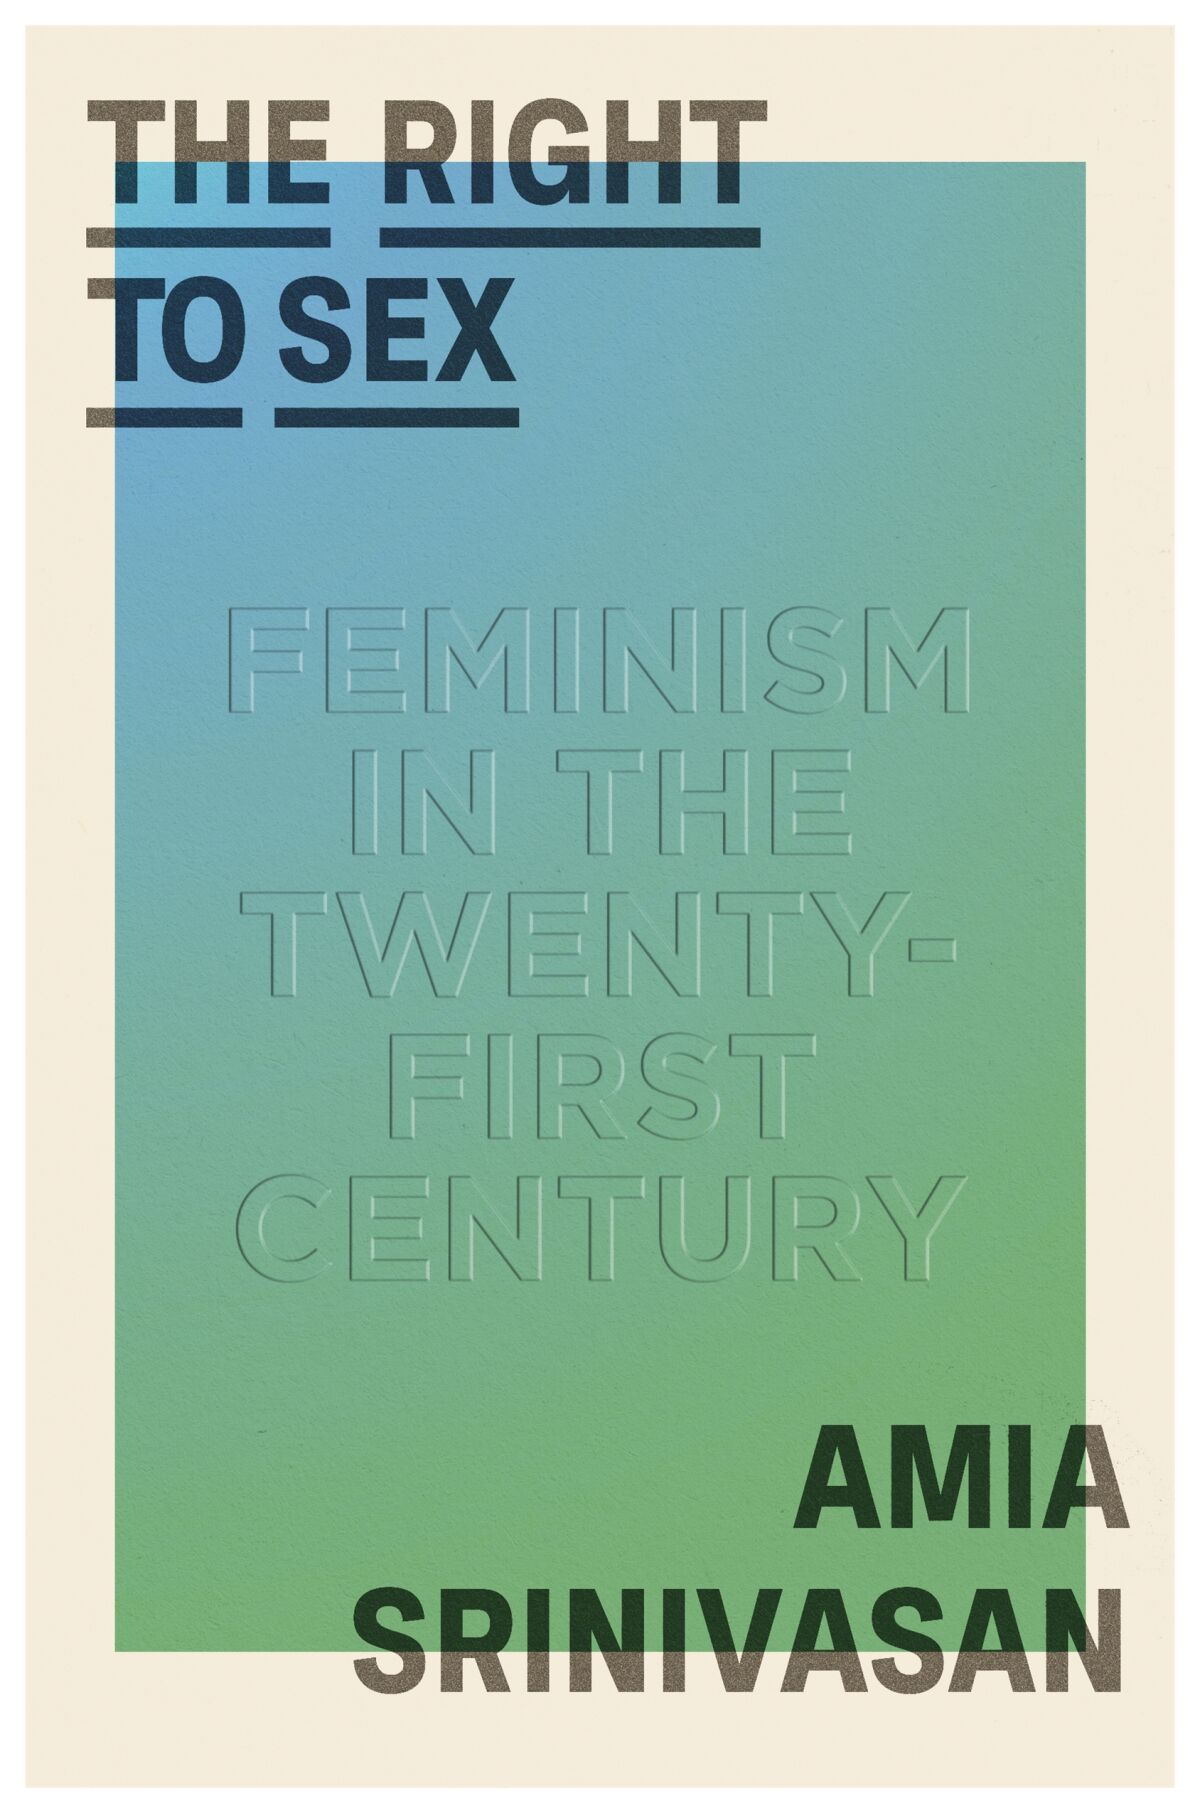 The words "The Right to Sex" in the upper left-hand corner, the author's name in the lower right